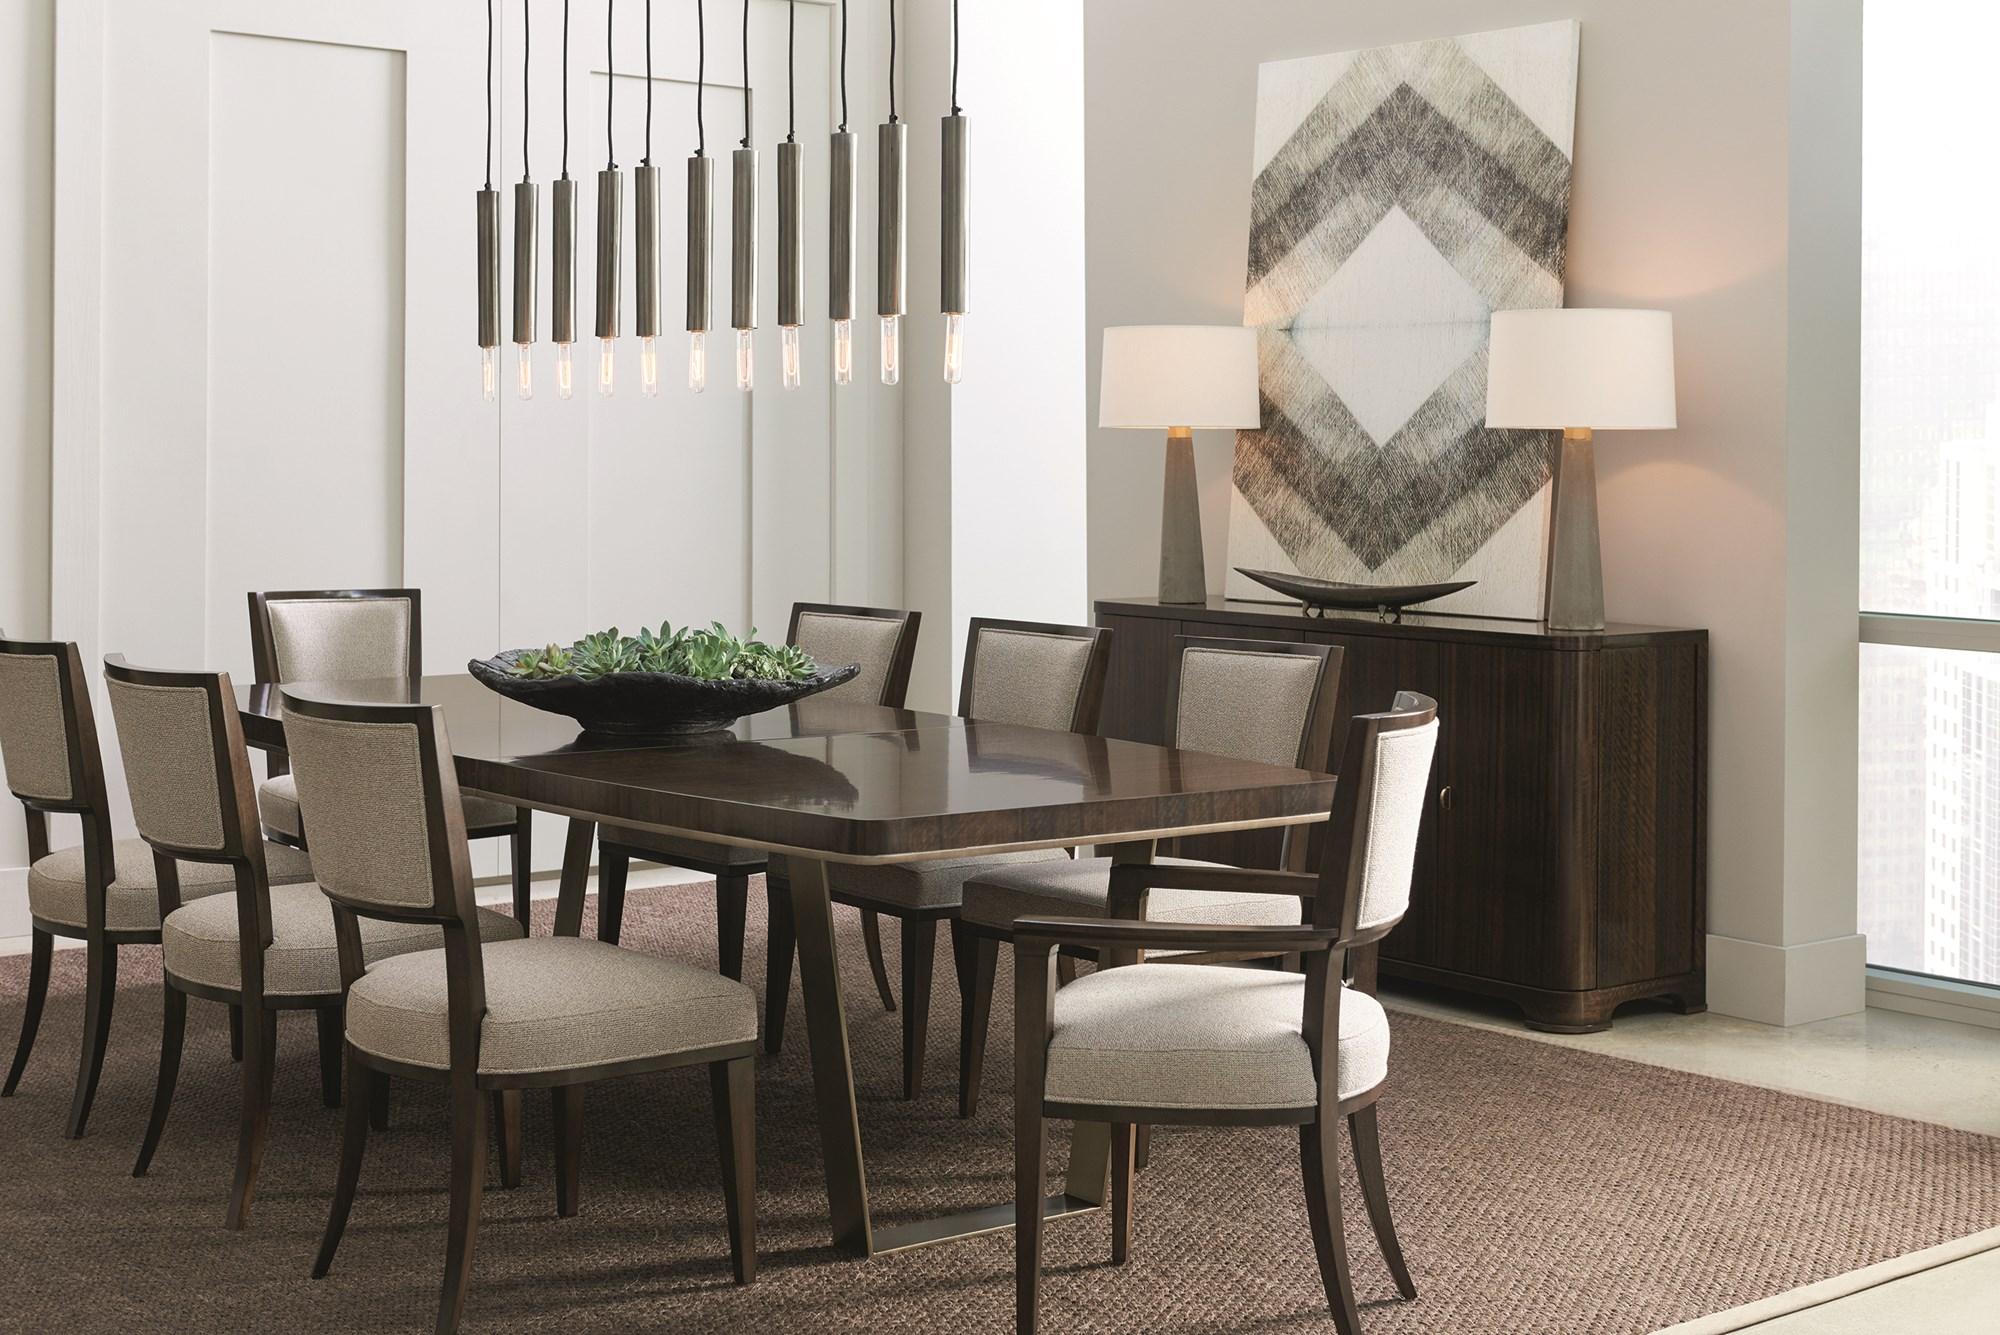 Contemporary Dining Table Set STREAMLINE DINING TABLE M022-417-201-Set-7 in Brown, Bronze, Beige Fabric